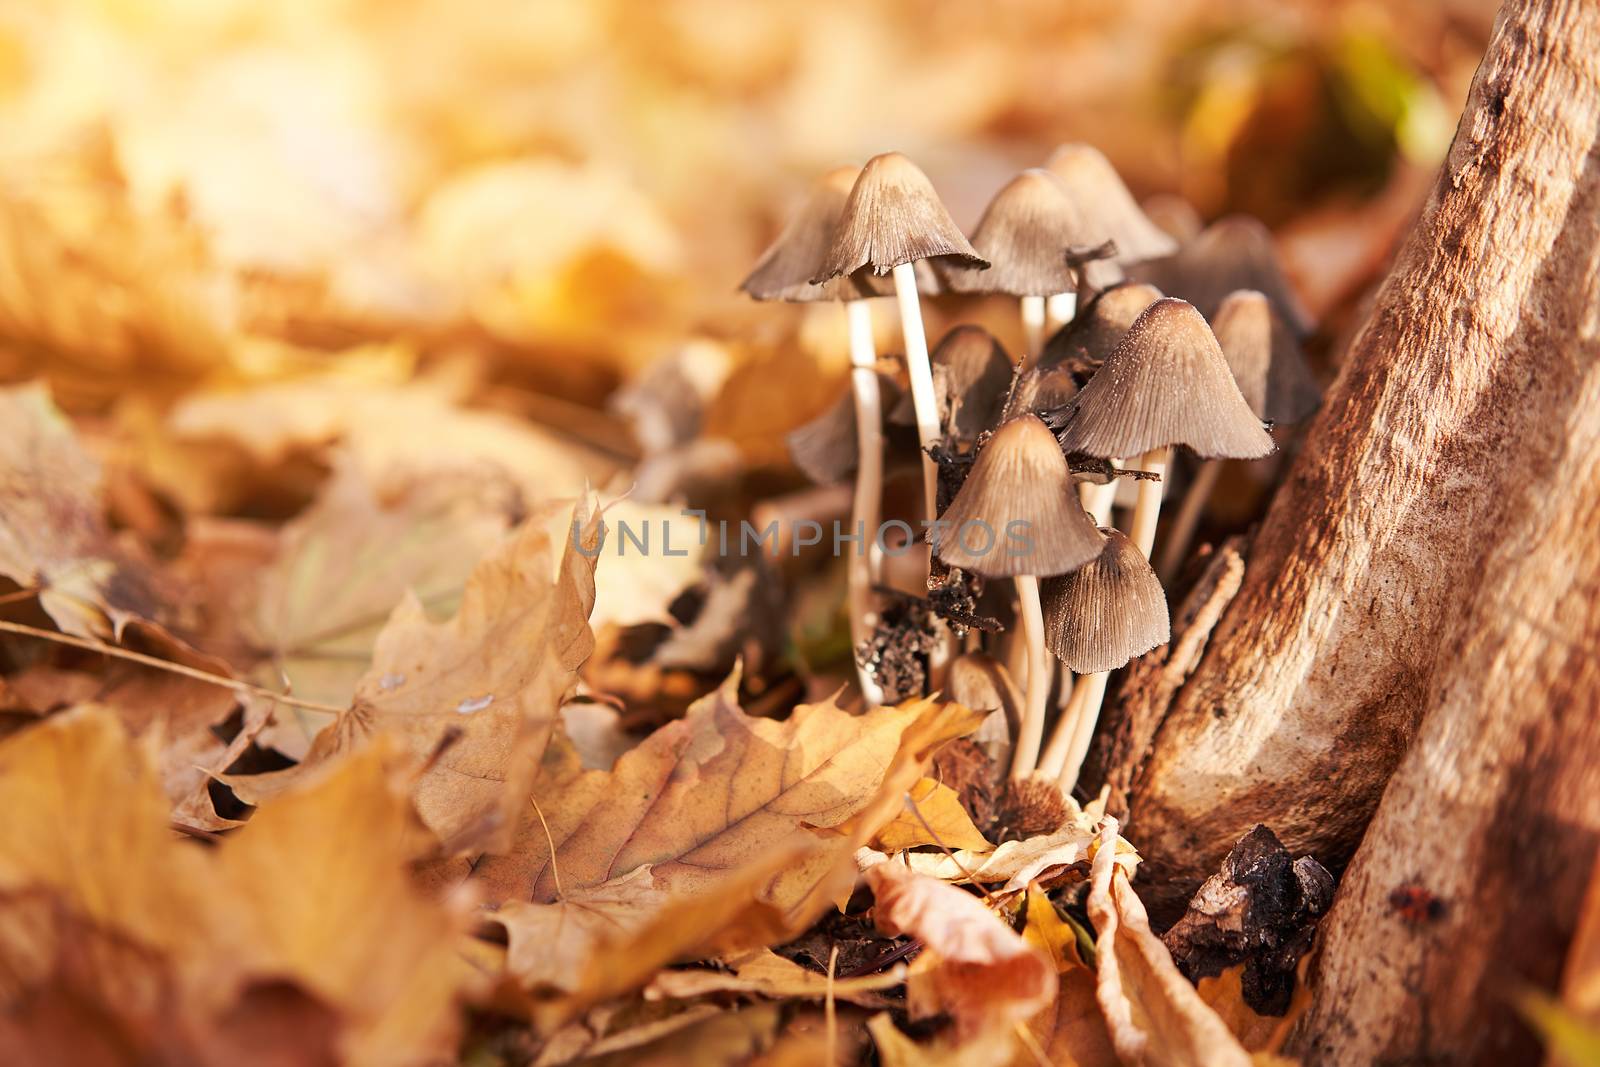 Poisonous mushrooms group grow in autumn leaves near the tree. toadstool grebe fungus fairy-mushroom background.